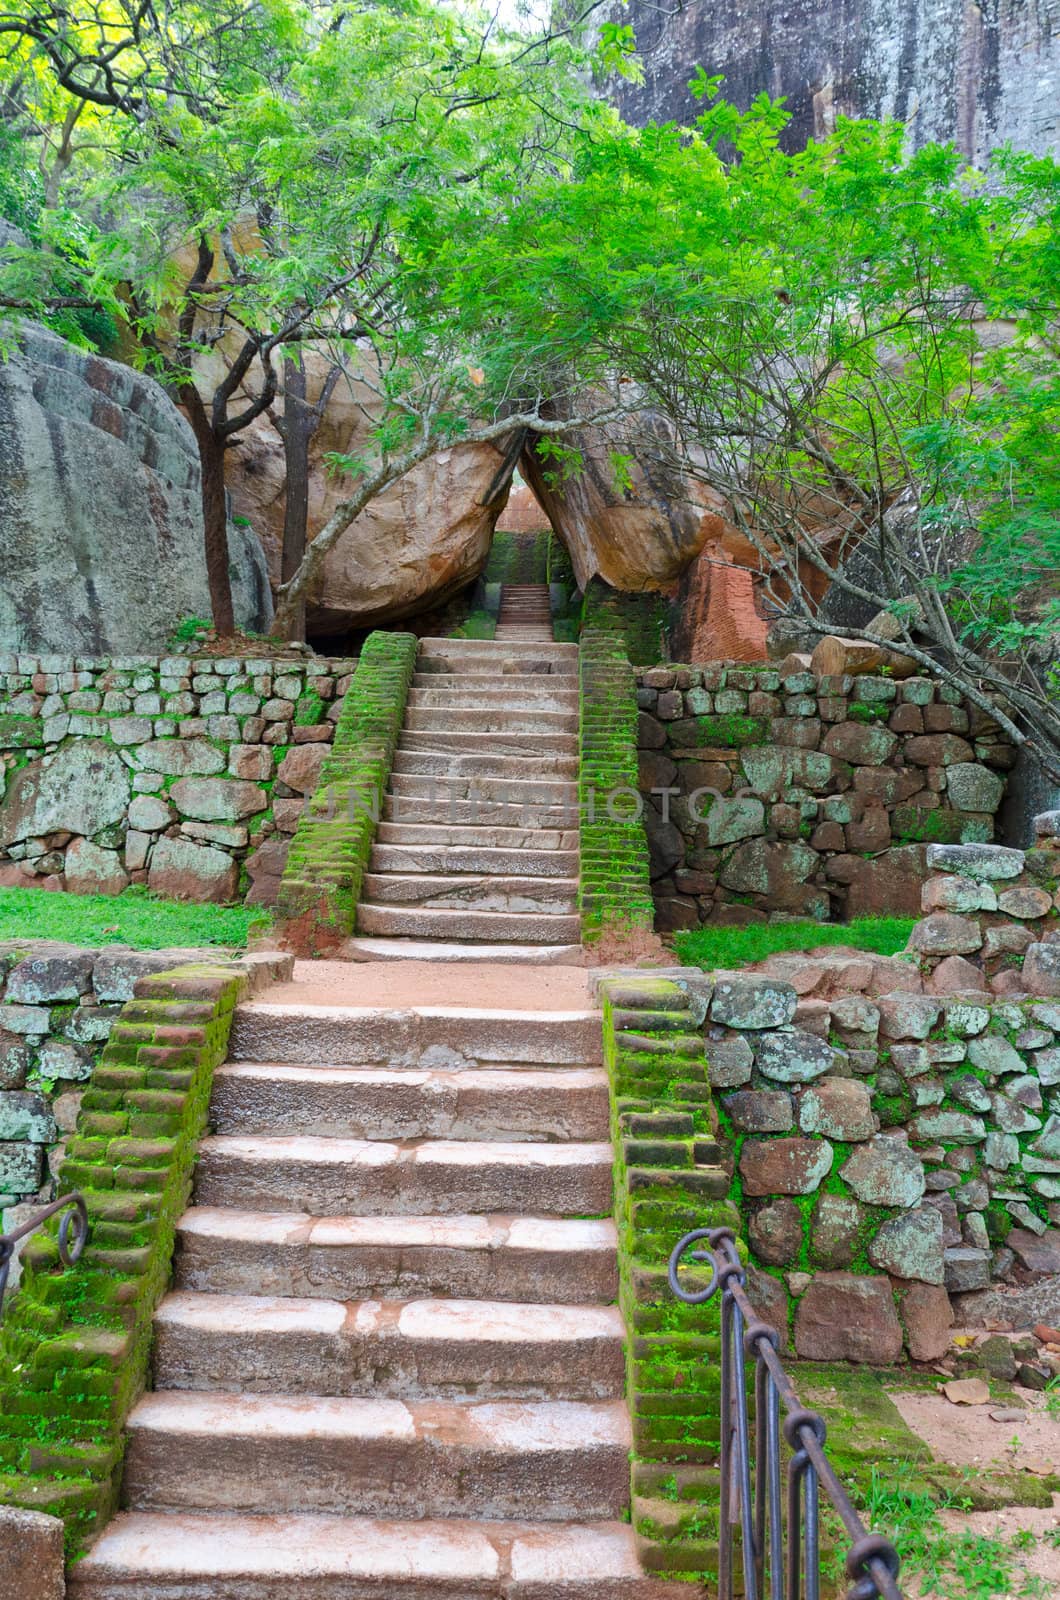 Sigiriya ( Lion's rock ) is a large stone and ancient palace ruin in the central  Sri Lanka ( Ceylon )